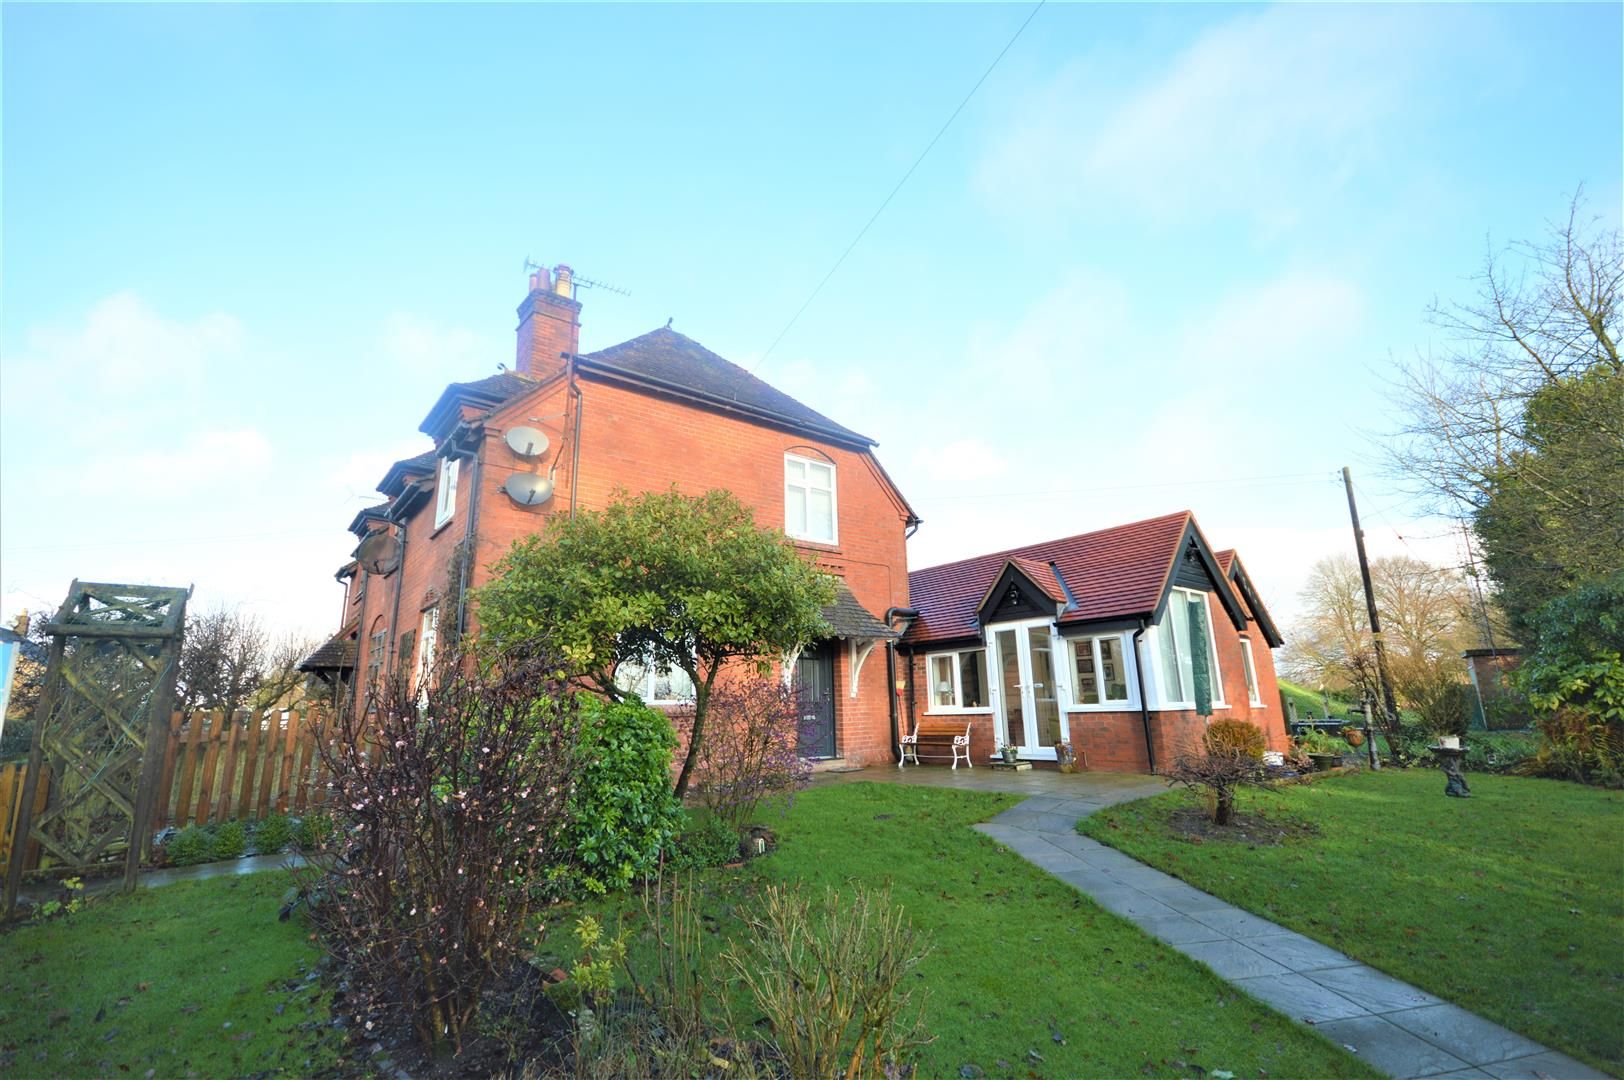 4 bed semi-detached for sale in Leysters - Property Image 1